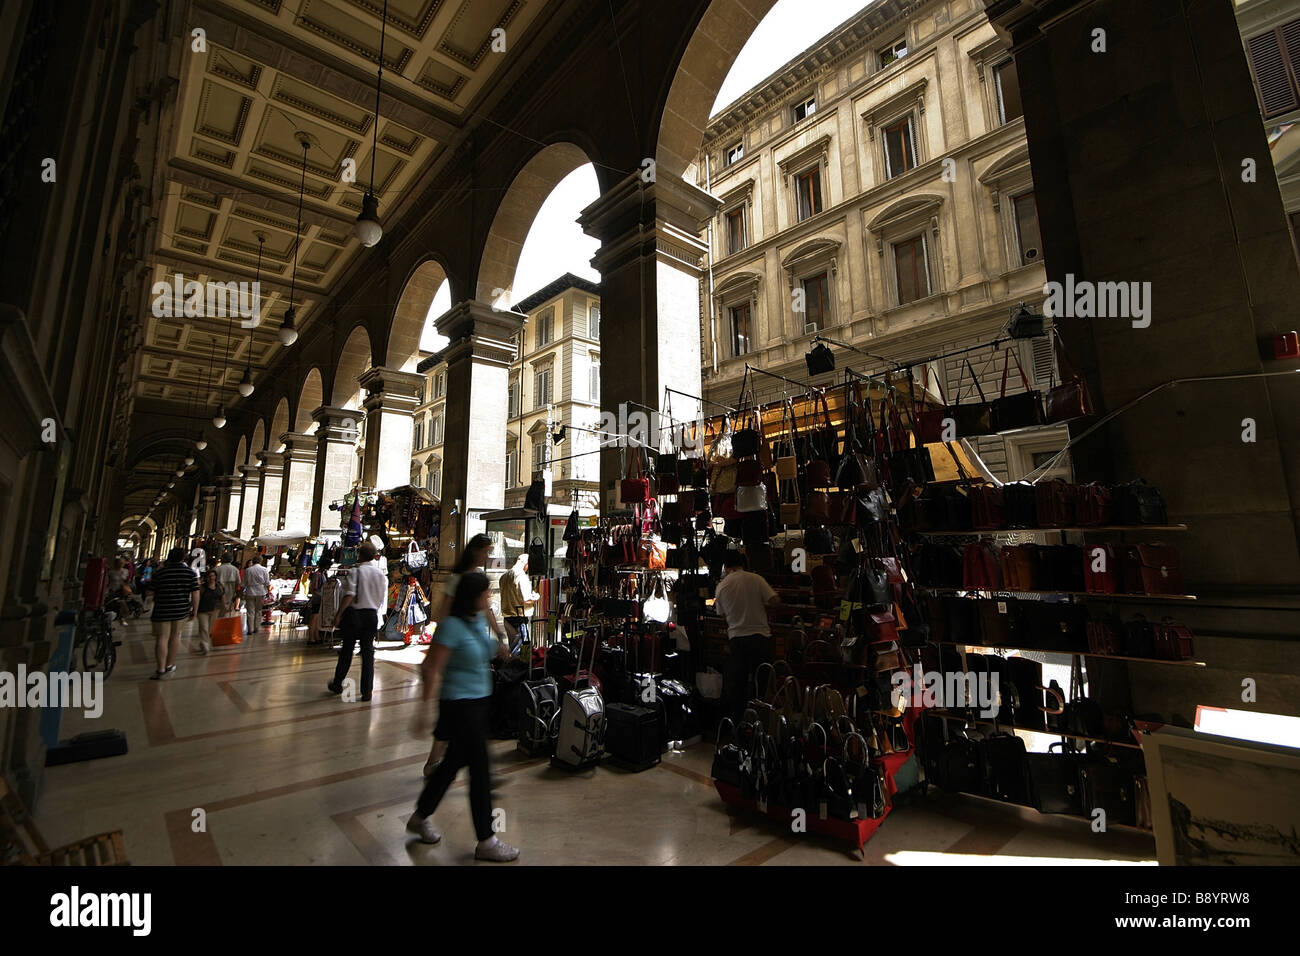 Old Shopping Mall In Florence Italy Stock Photo 22739060 Alamy